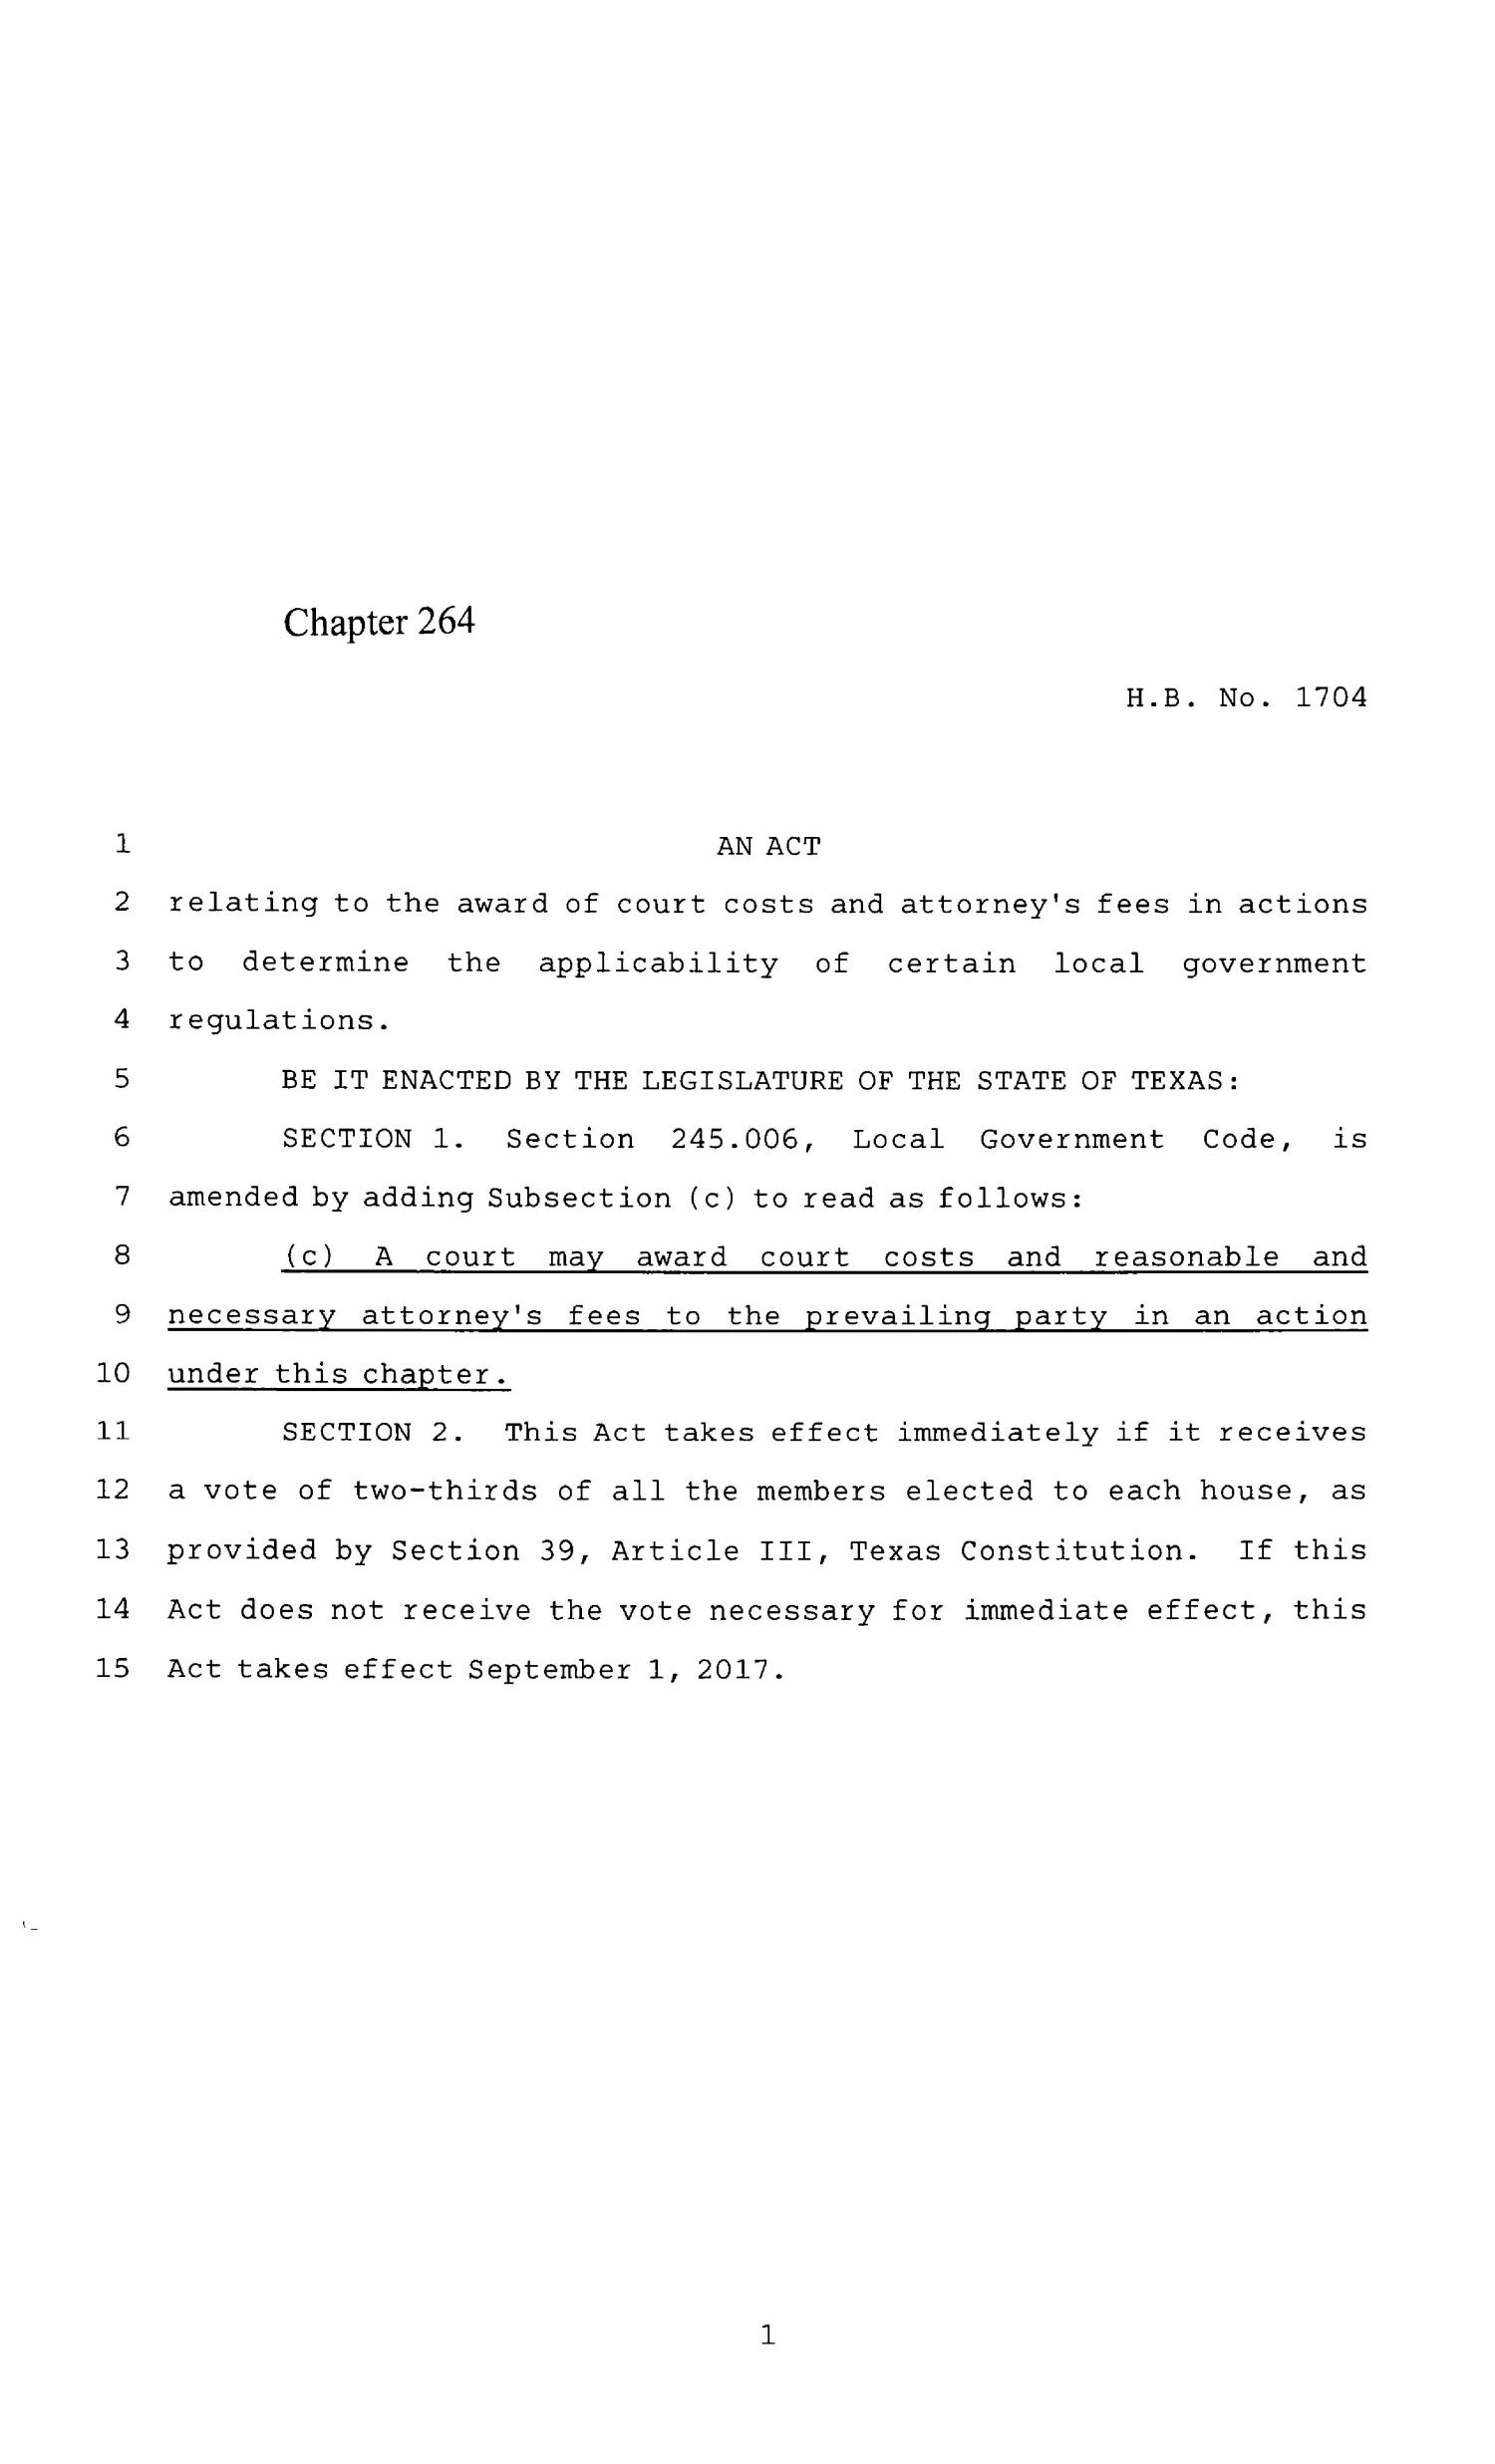 85th Texas Legislature, Regular Session, House Bill 1704, Chapter 264
                                                
                                                    [Sequence #]: 1 of 4
                                                